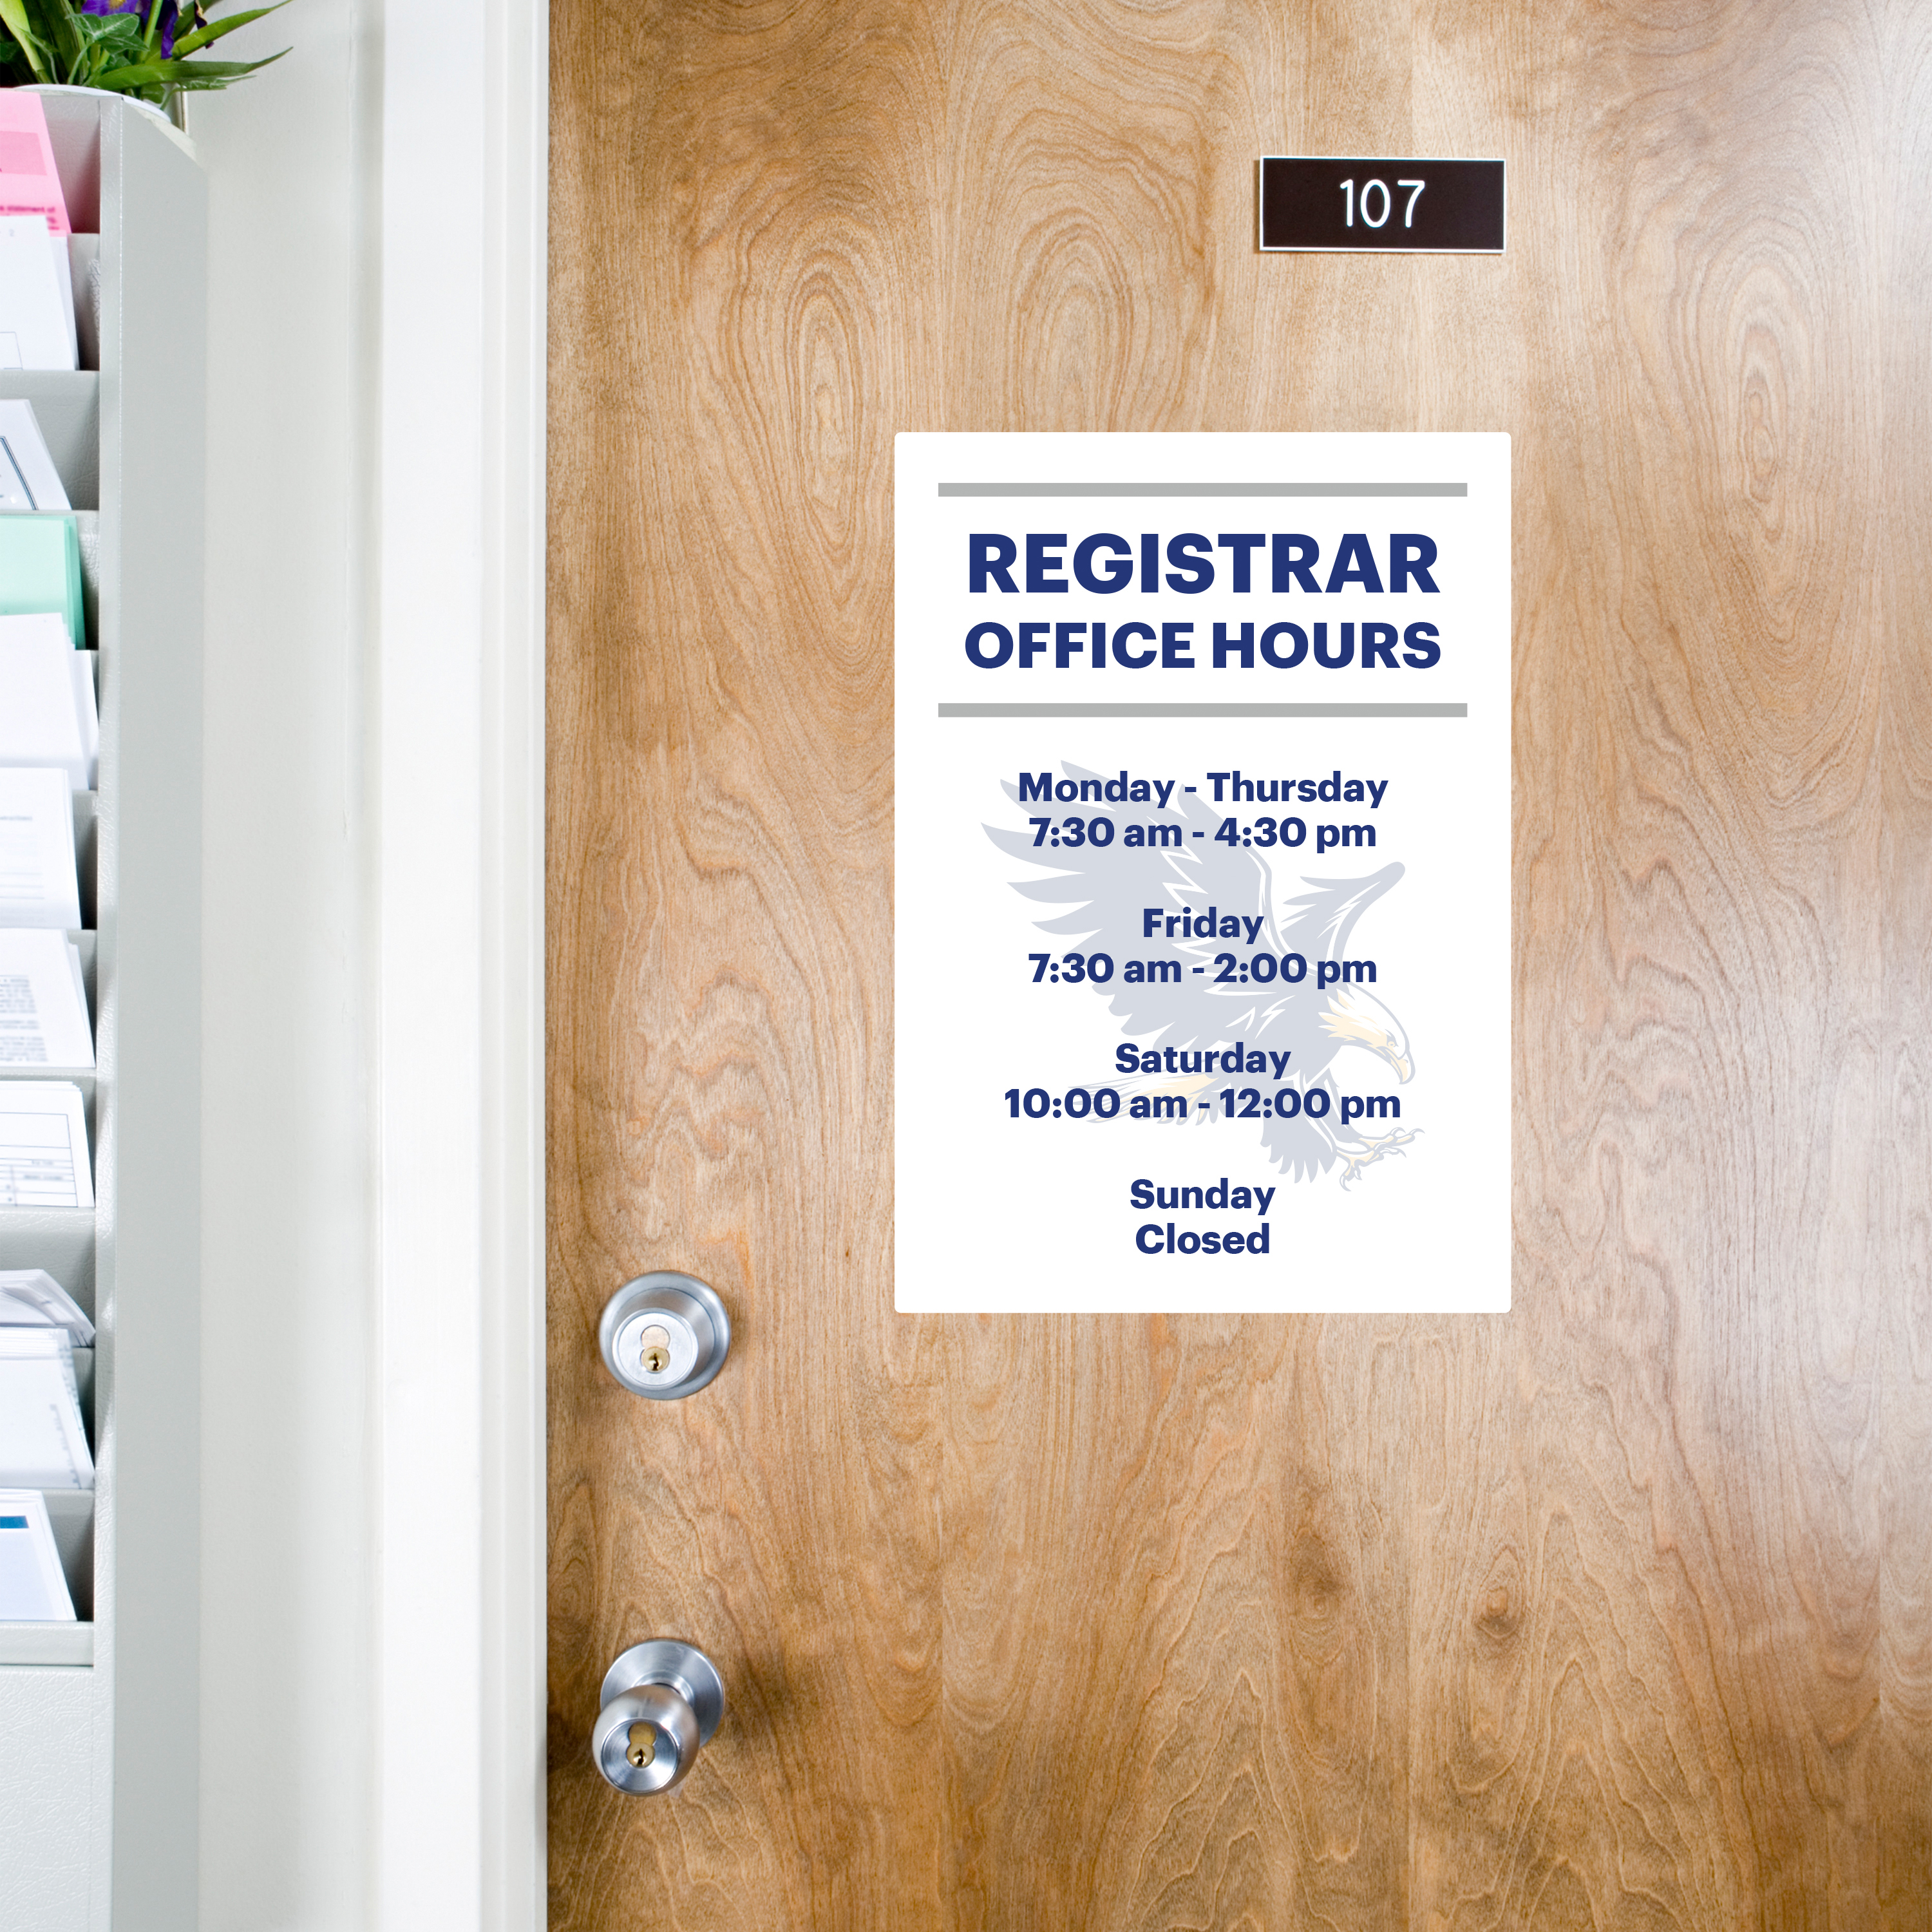 An example of an office hours sign printed on Avery 61515 removable signs for doors and walls. The sign reads "Registrar Office Hours" and lists days and times. The sign is applied on a wooden school office door. 